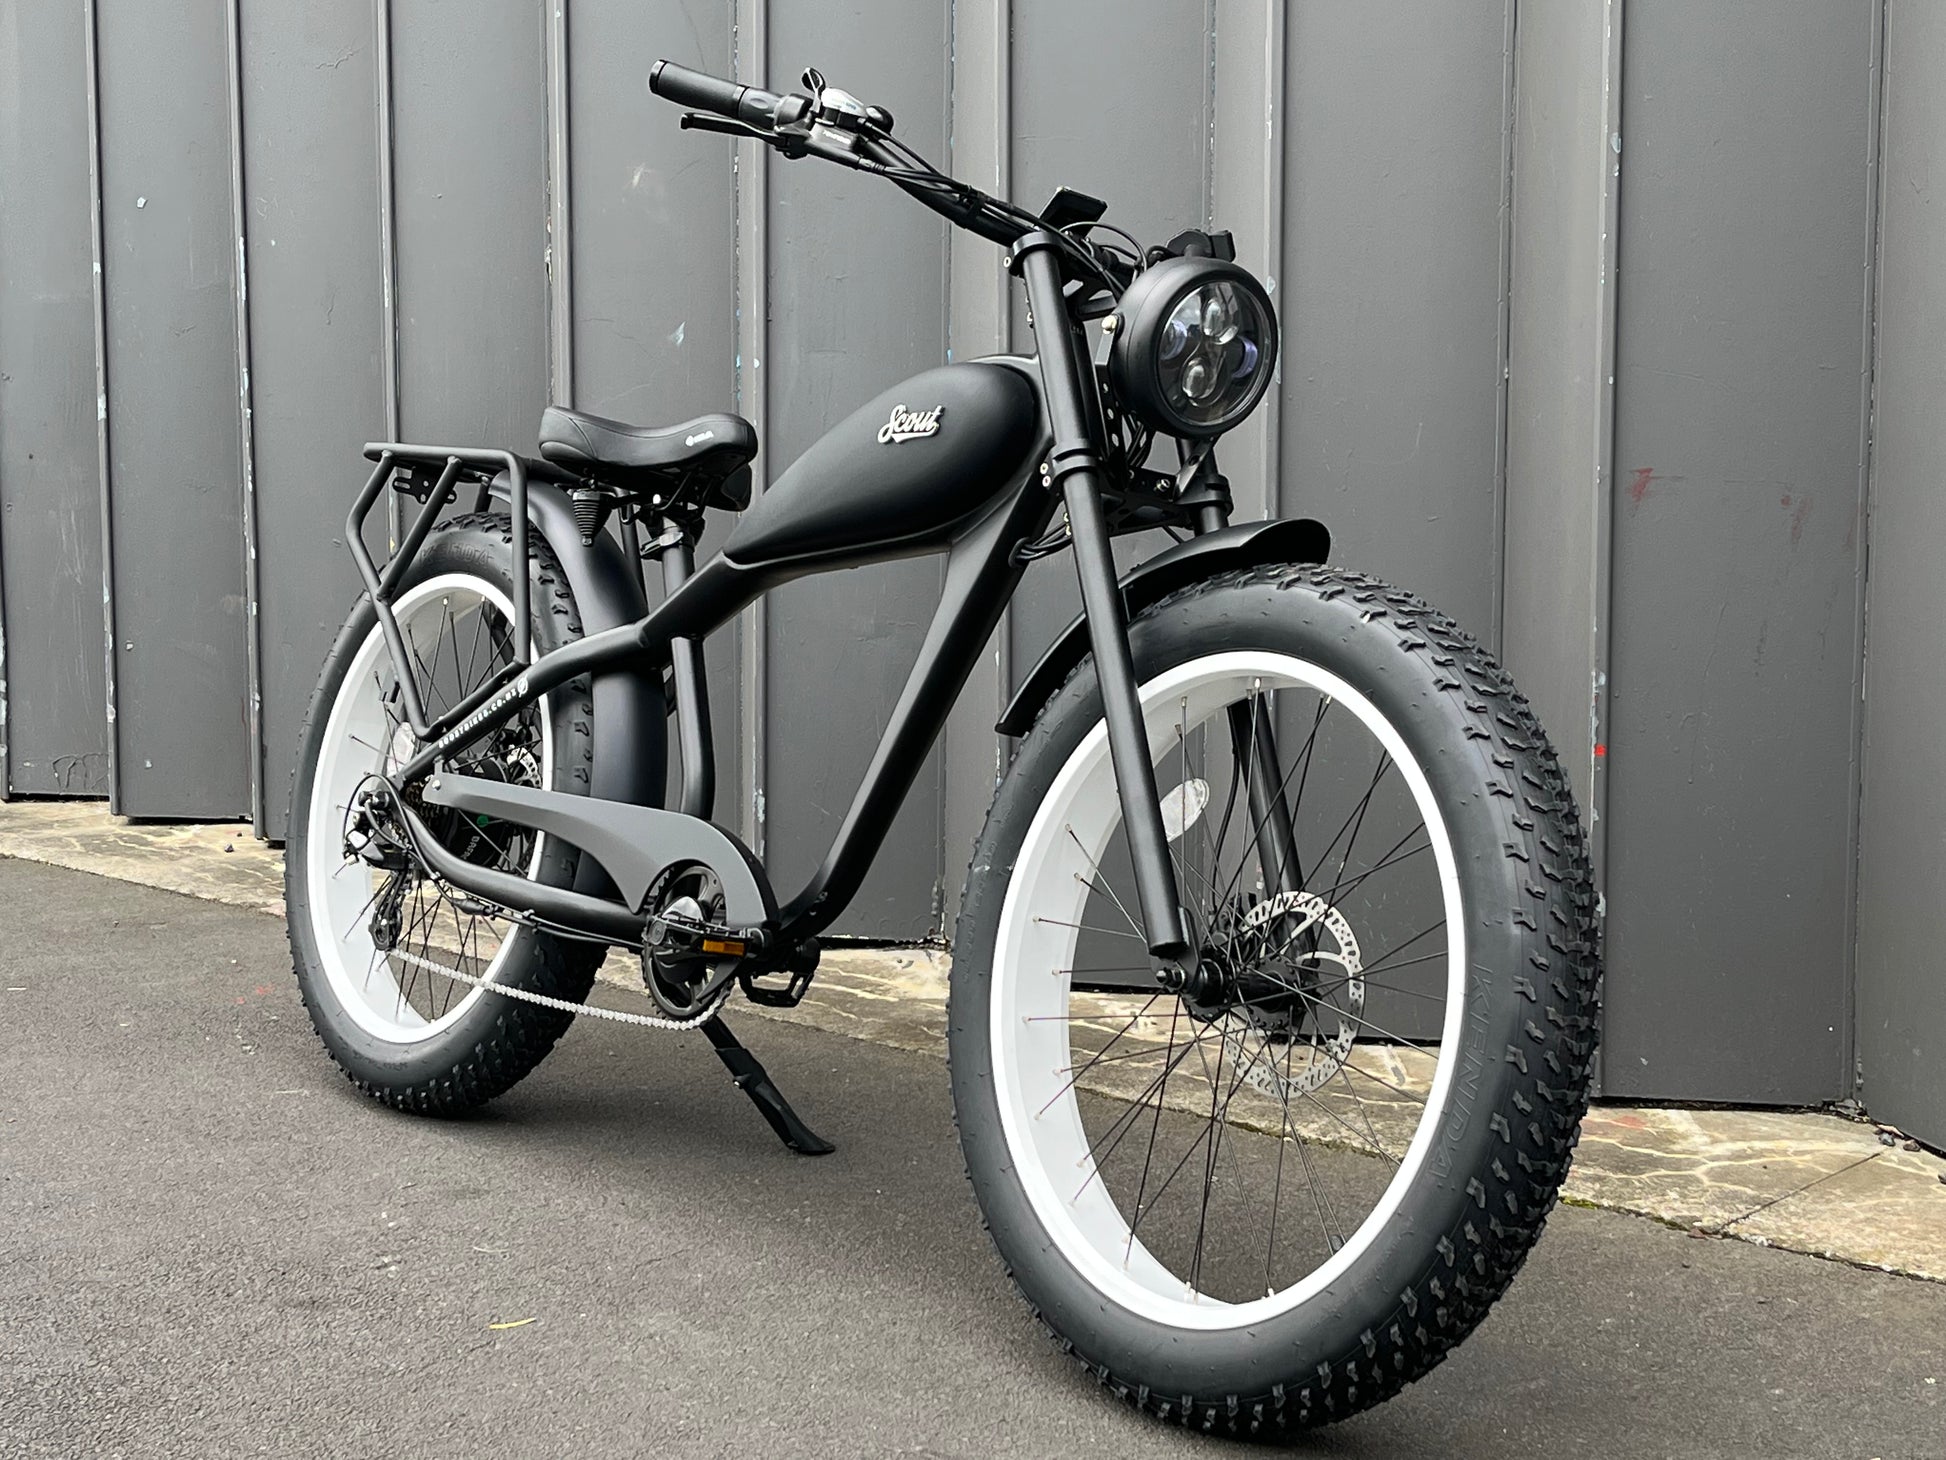 The Most Comfortable Cruiser ebike ever. Choice of frame and trim and tyre combinations. All Terrain, STREET or Whitewall tyres. The Scout Electric Motorbike from Boostbikes